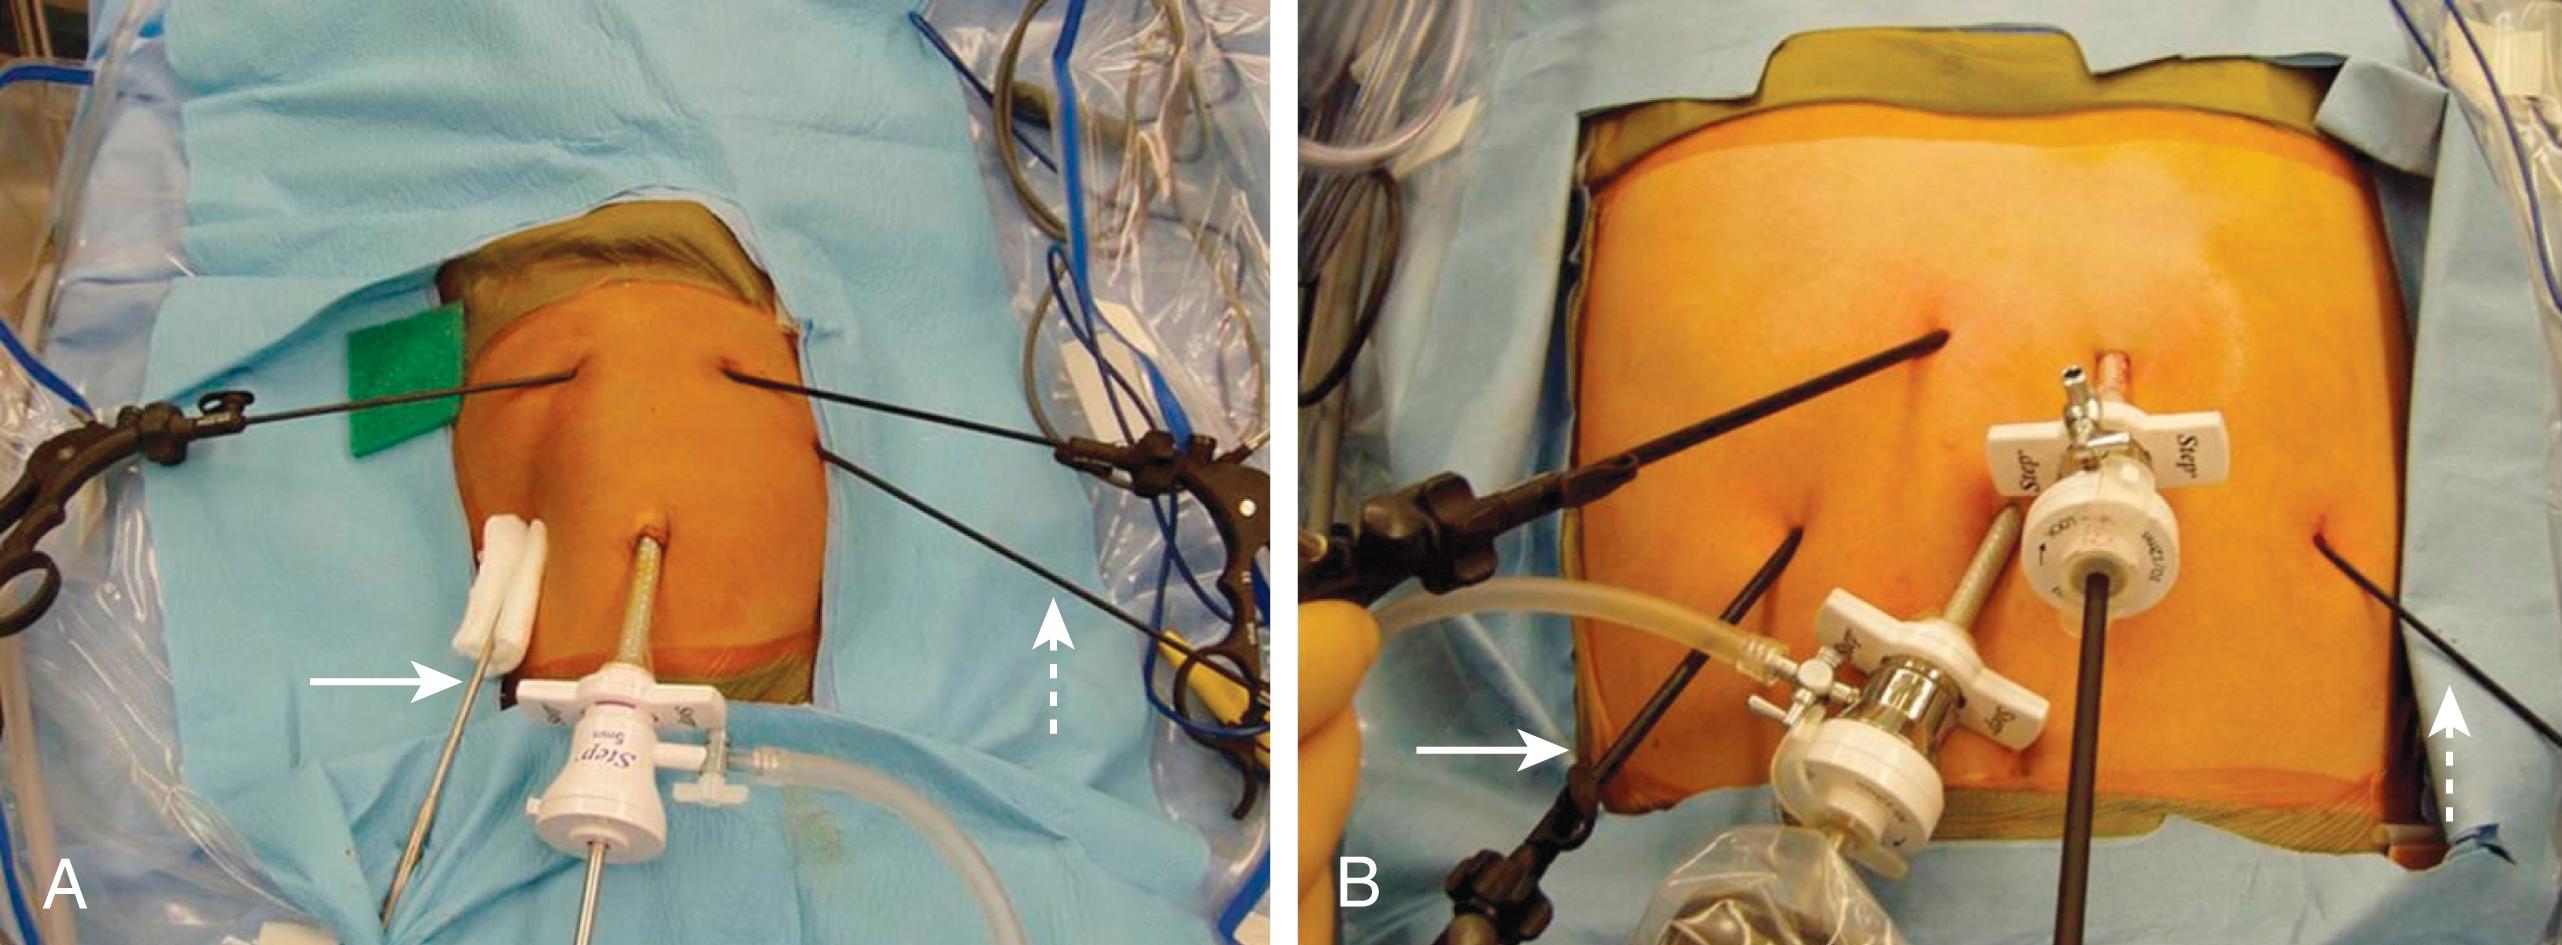 Fig. 2-2, There are a number of ways to orient the instruments when performing a laparoscopic fundoplication. With our technique, the 45-degree angled 5-mm telescope is introduced after insertion of the 5-mm umbilical cannula. The liver retractor is introduced in the patient’s right subcostal region ( solid arrow ). The two main working ports are in the left and right epigastrium. The main working port for the surgeon is the one in the patient’s left epigastric region. It is through this incision that dissecting instruments, needle holder, and suture are introduced. The instrument used by the surgical assistant is in the patient’s left subcostal region ( dashed arrow ). The stab incision technique can be used for both infants ( A ) and adolescents ( B ).